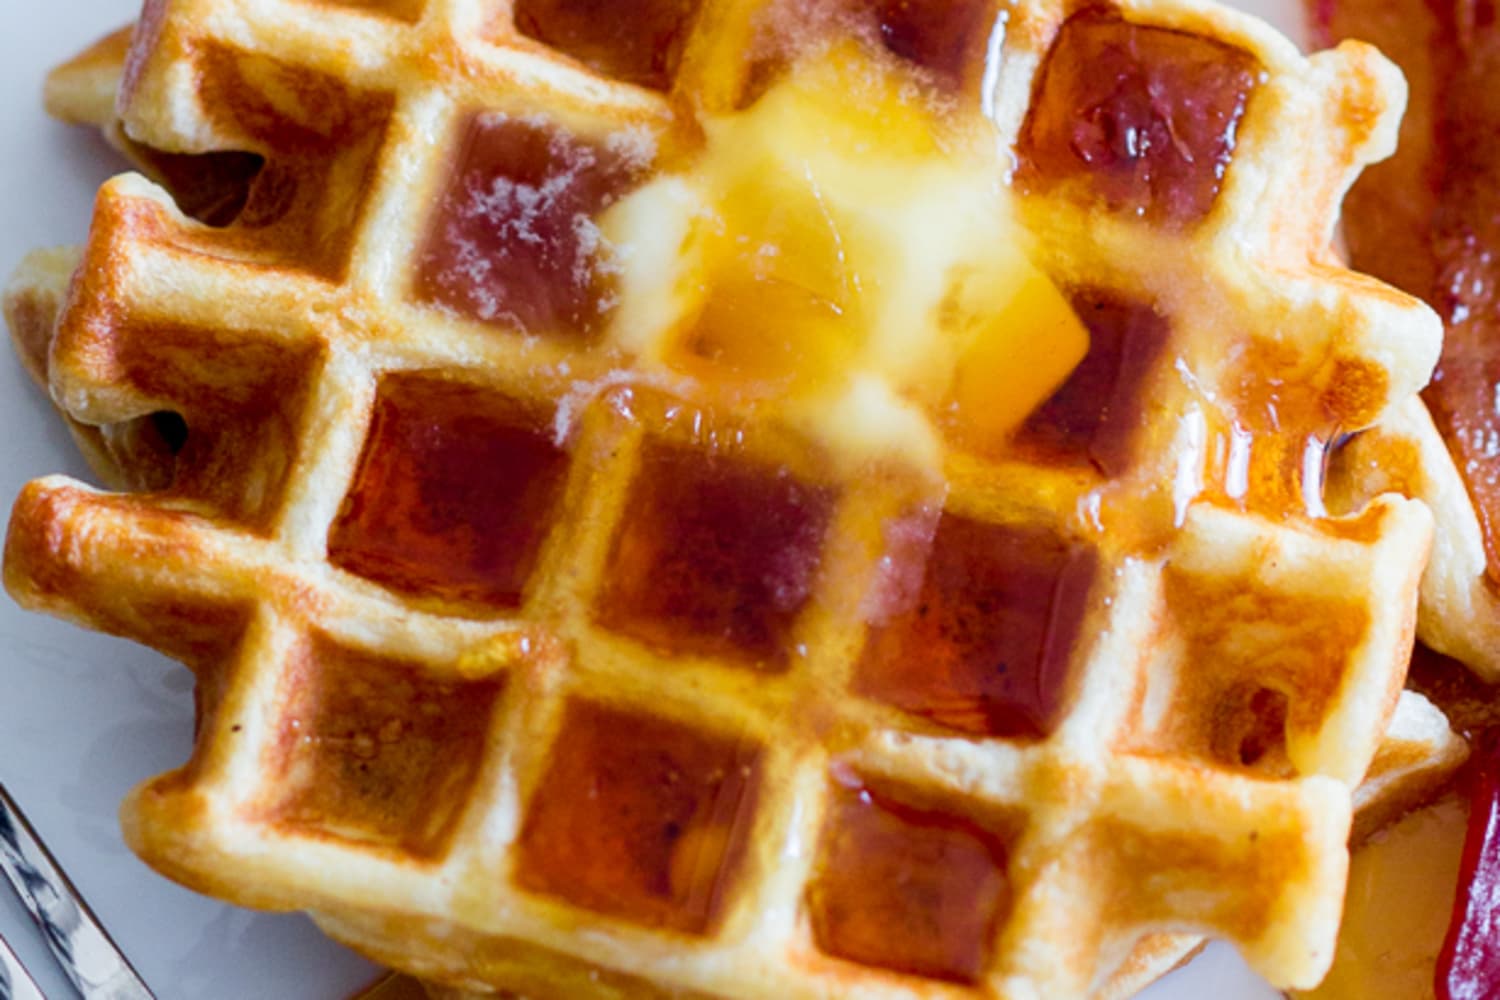 How To Make the Lightest, Crispiest Waffles